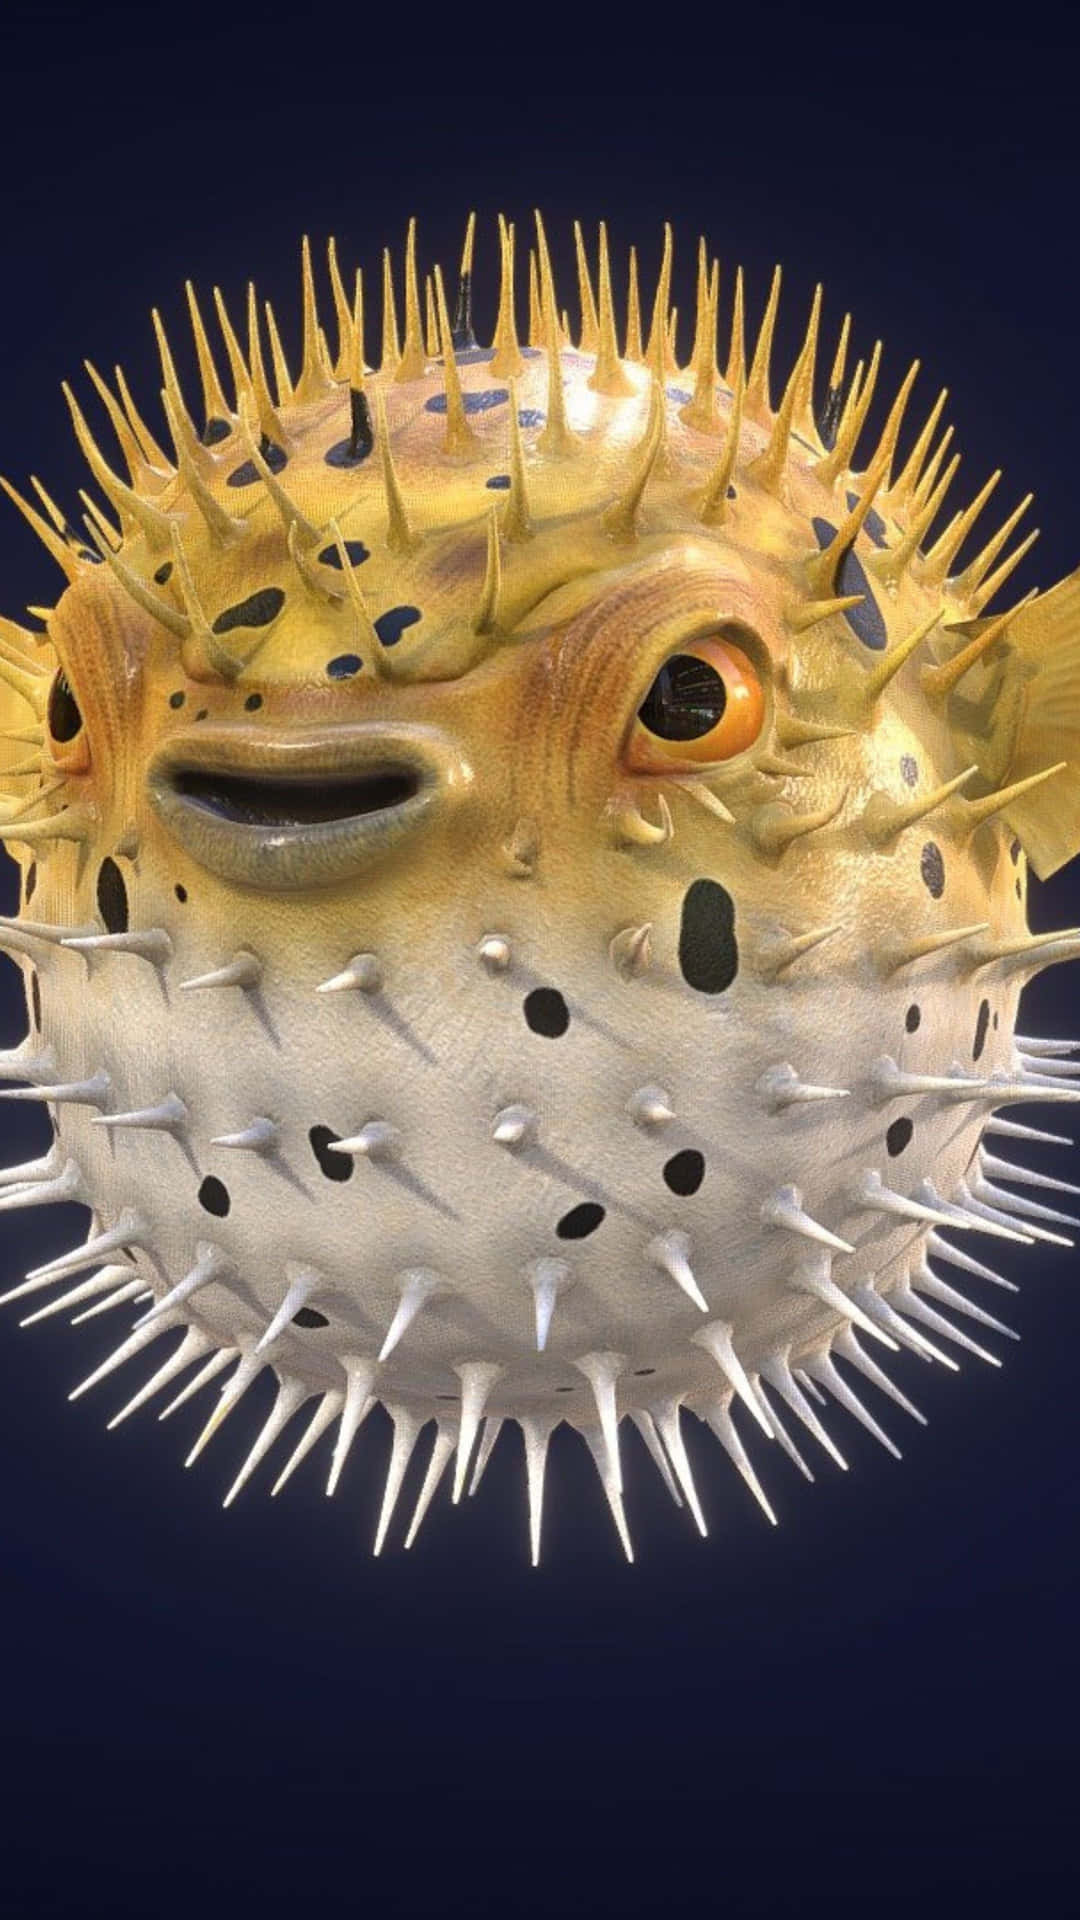 Inflated Blowfish Portrait Wallpaper